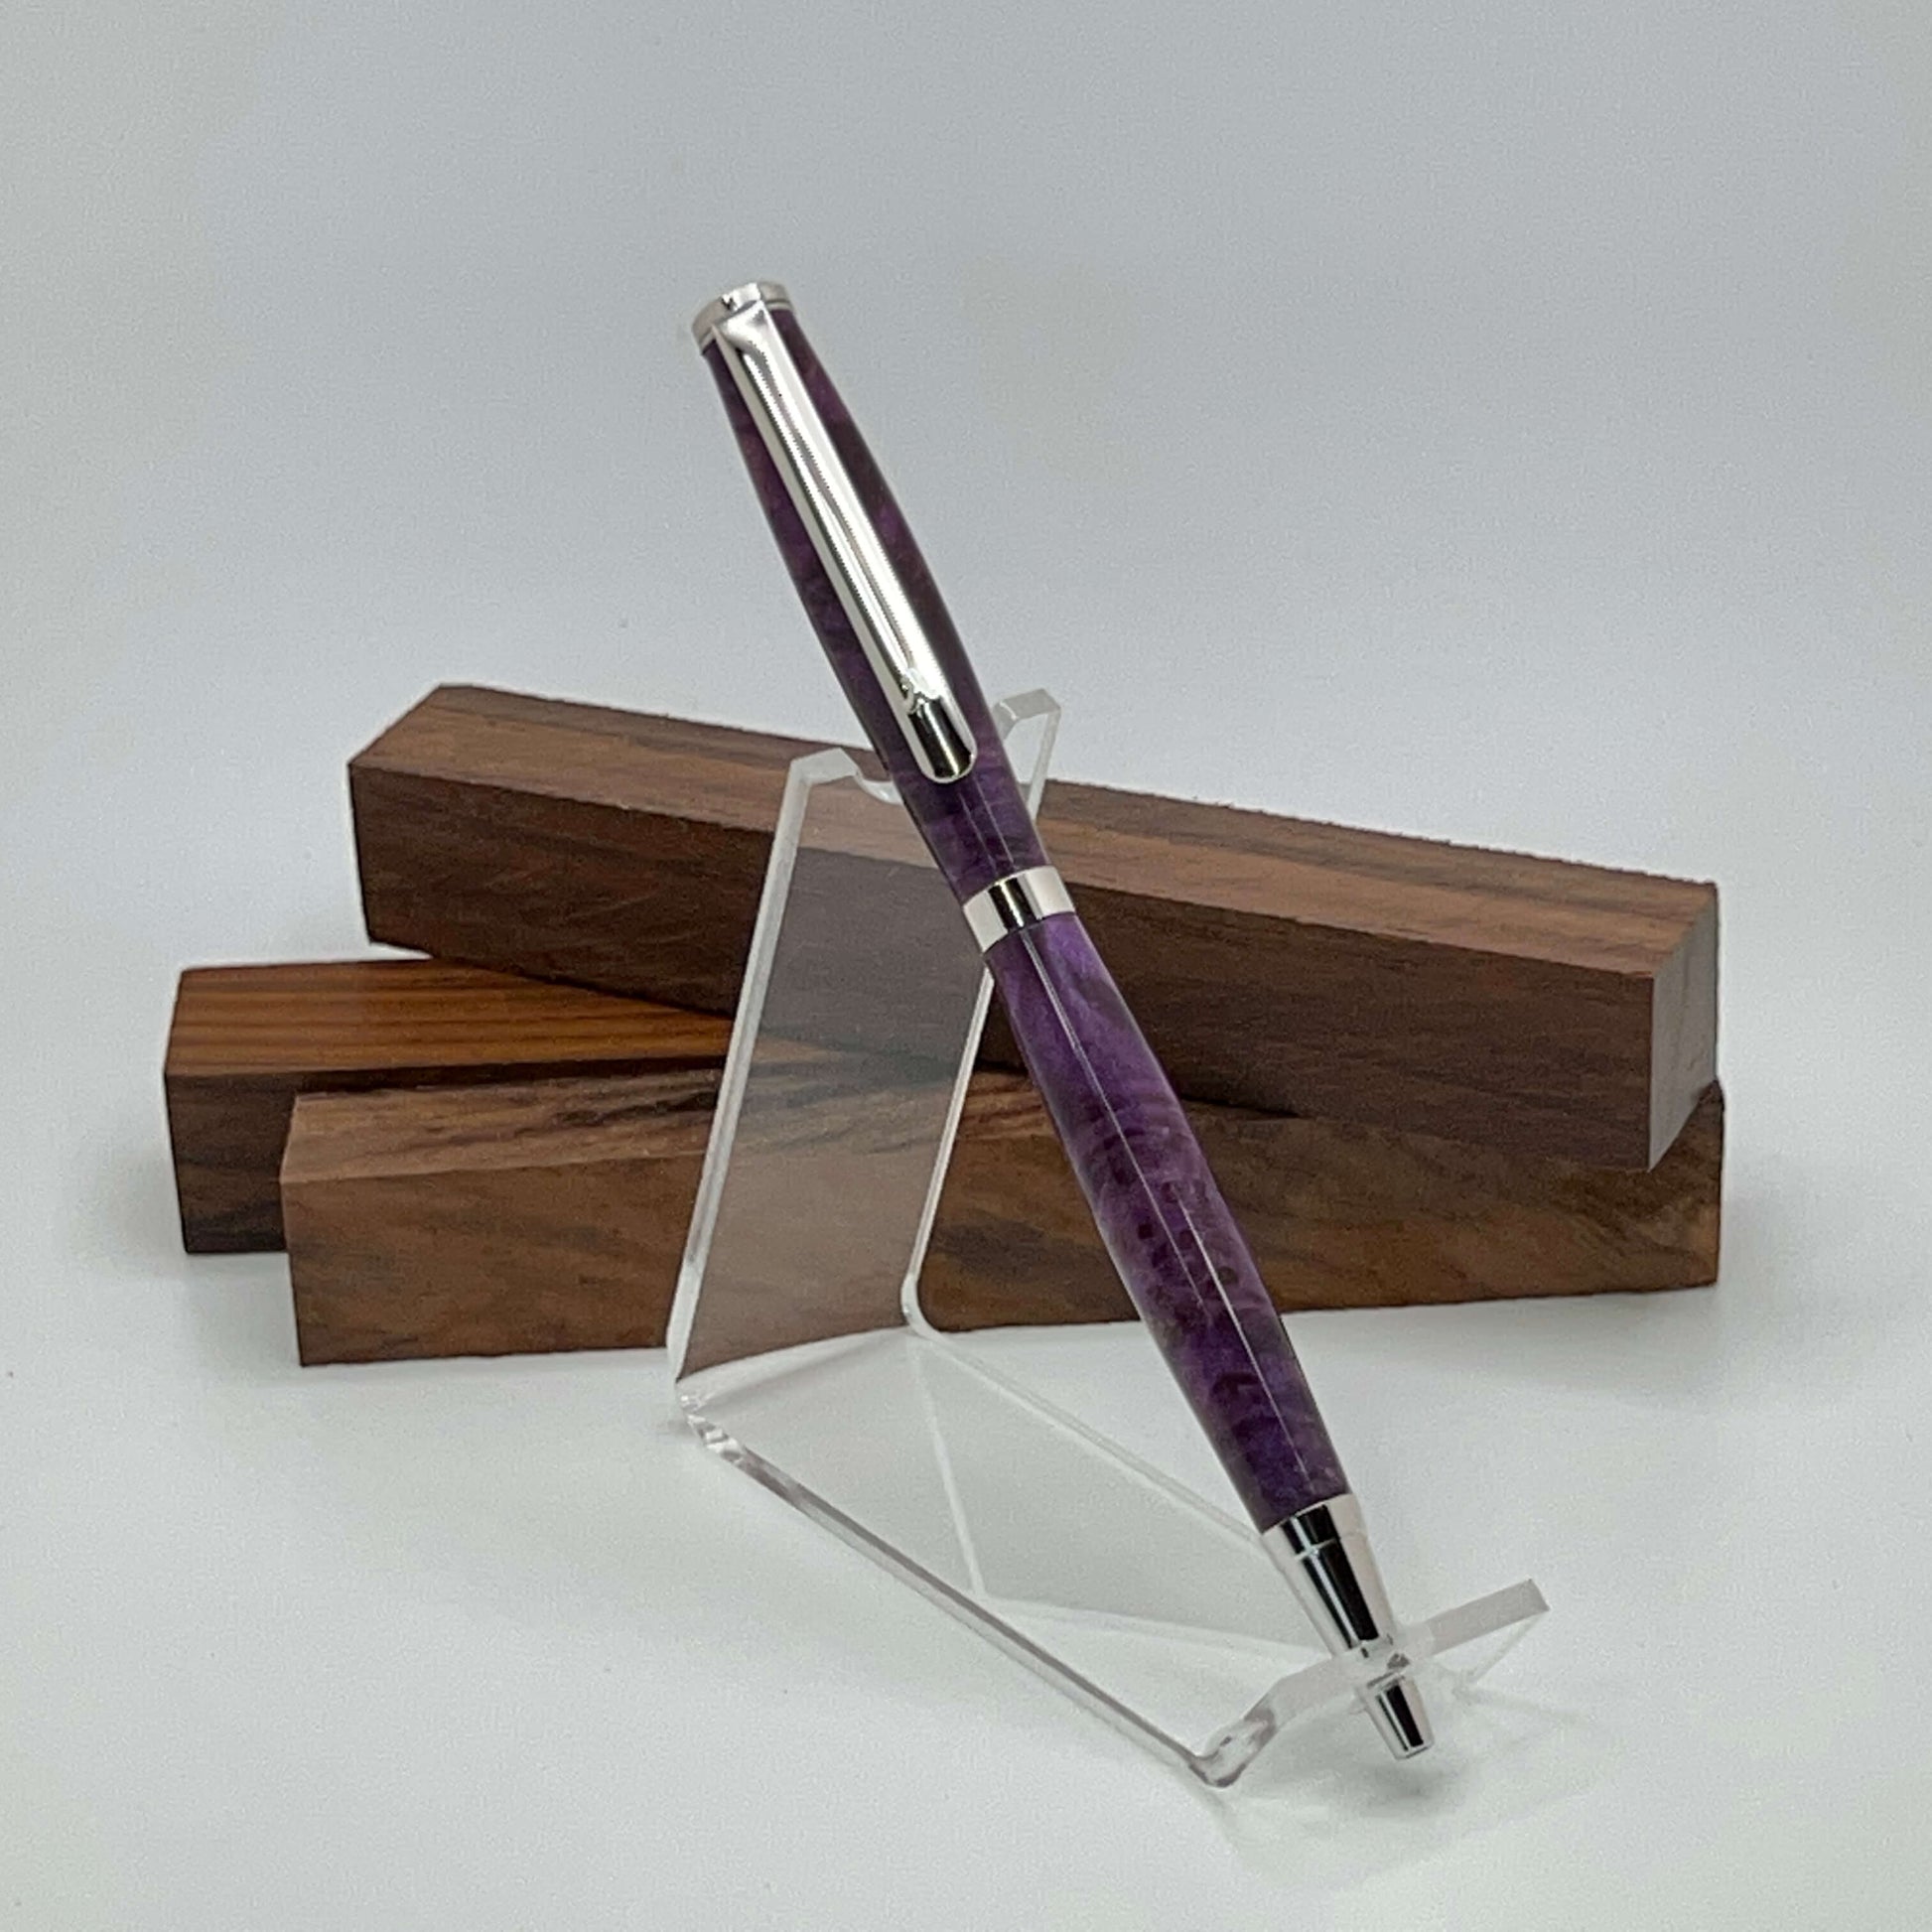 Handcrafted pen with Box Elder Burl wood dyed purple and rhodium hardware